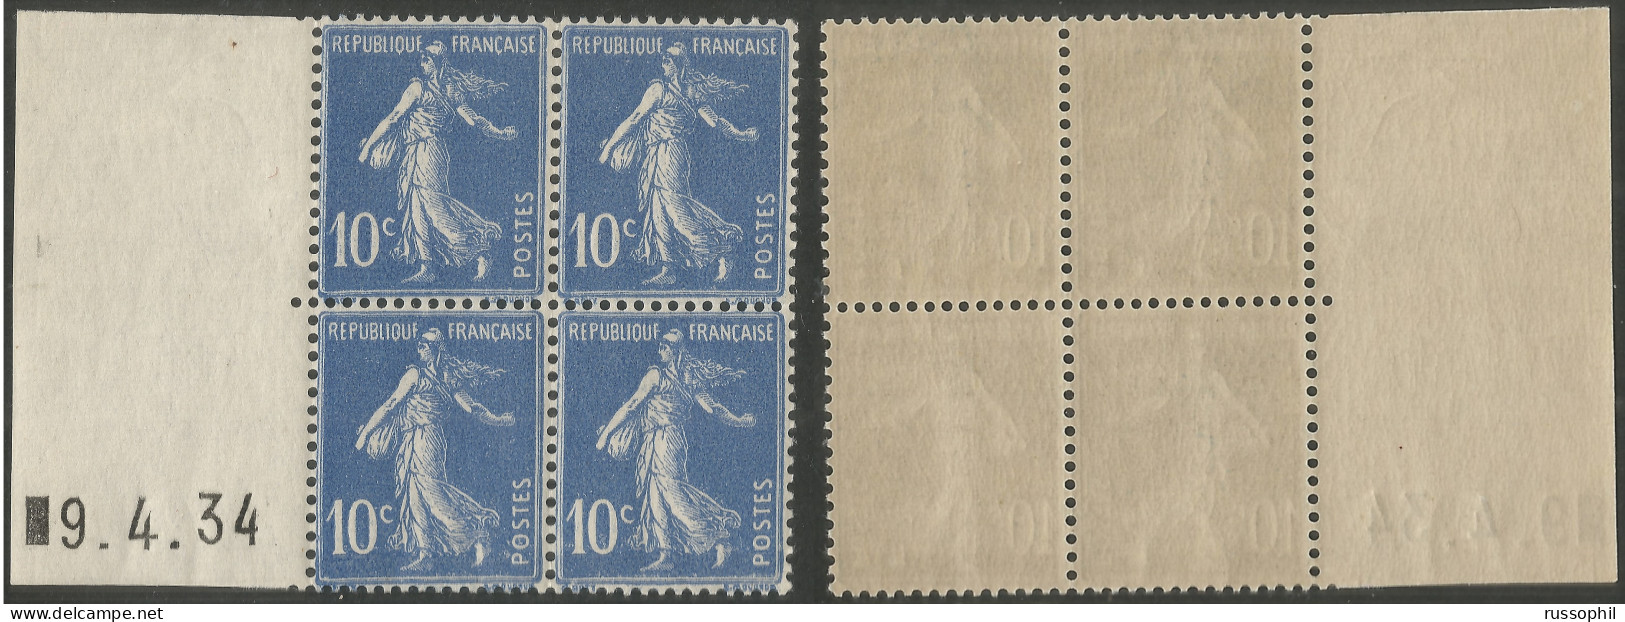 FRANCE - ROULETTE - Yv  #279 - BLOC DE 4 COIN DATE A GAUCHE 9.4.34 (**) - ROLLER BLOCK OF 4 LEFT DATED 9.4.34 (MNH) - Roulettes